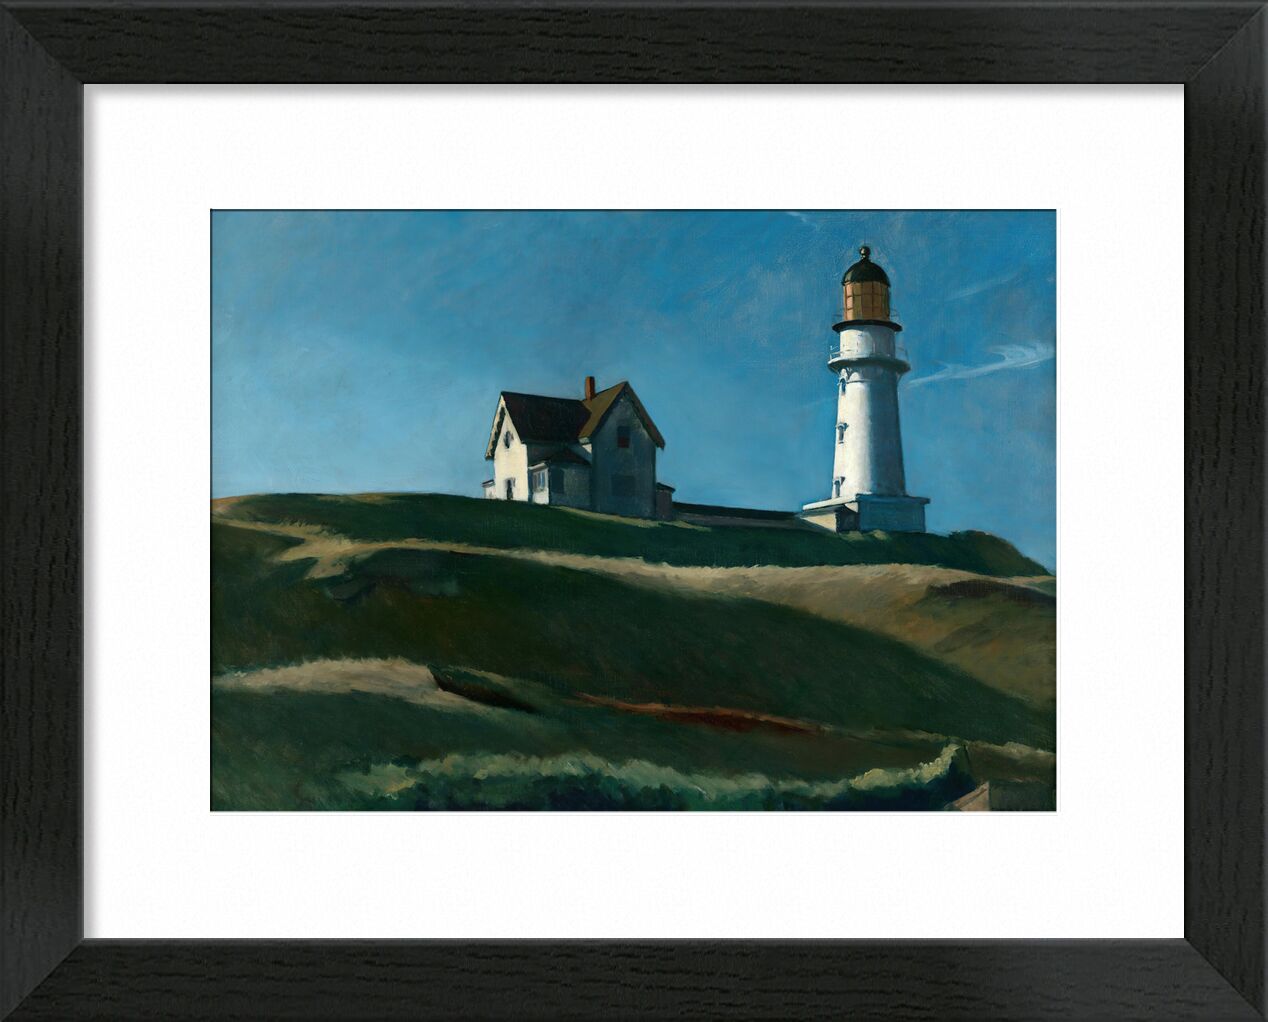 Painting Hopper The House By The Railroad Giant Wall Canvas Art Print